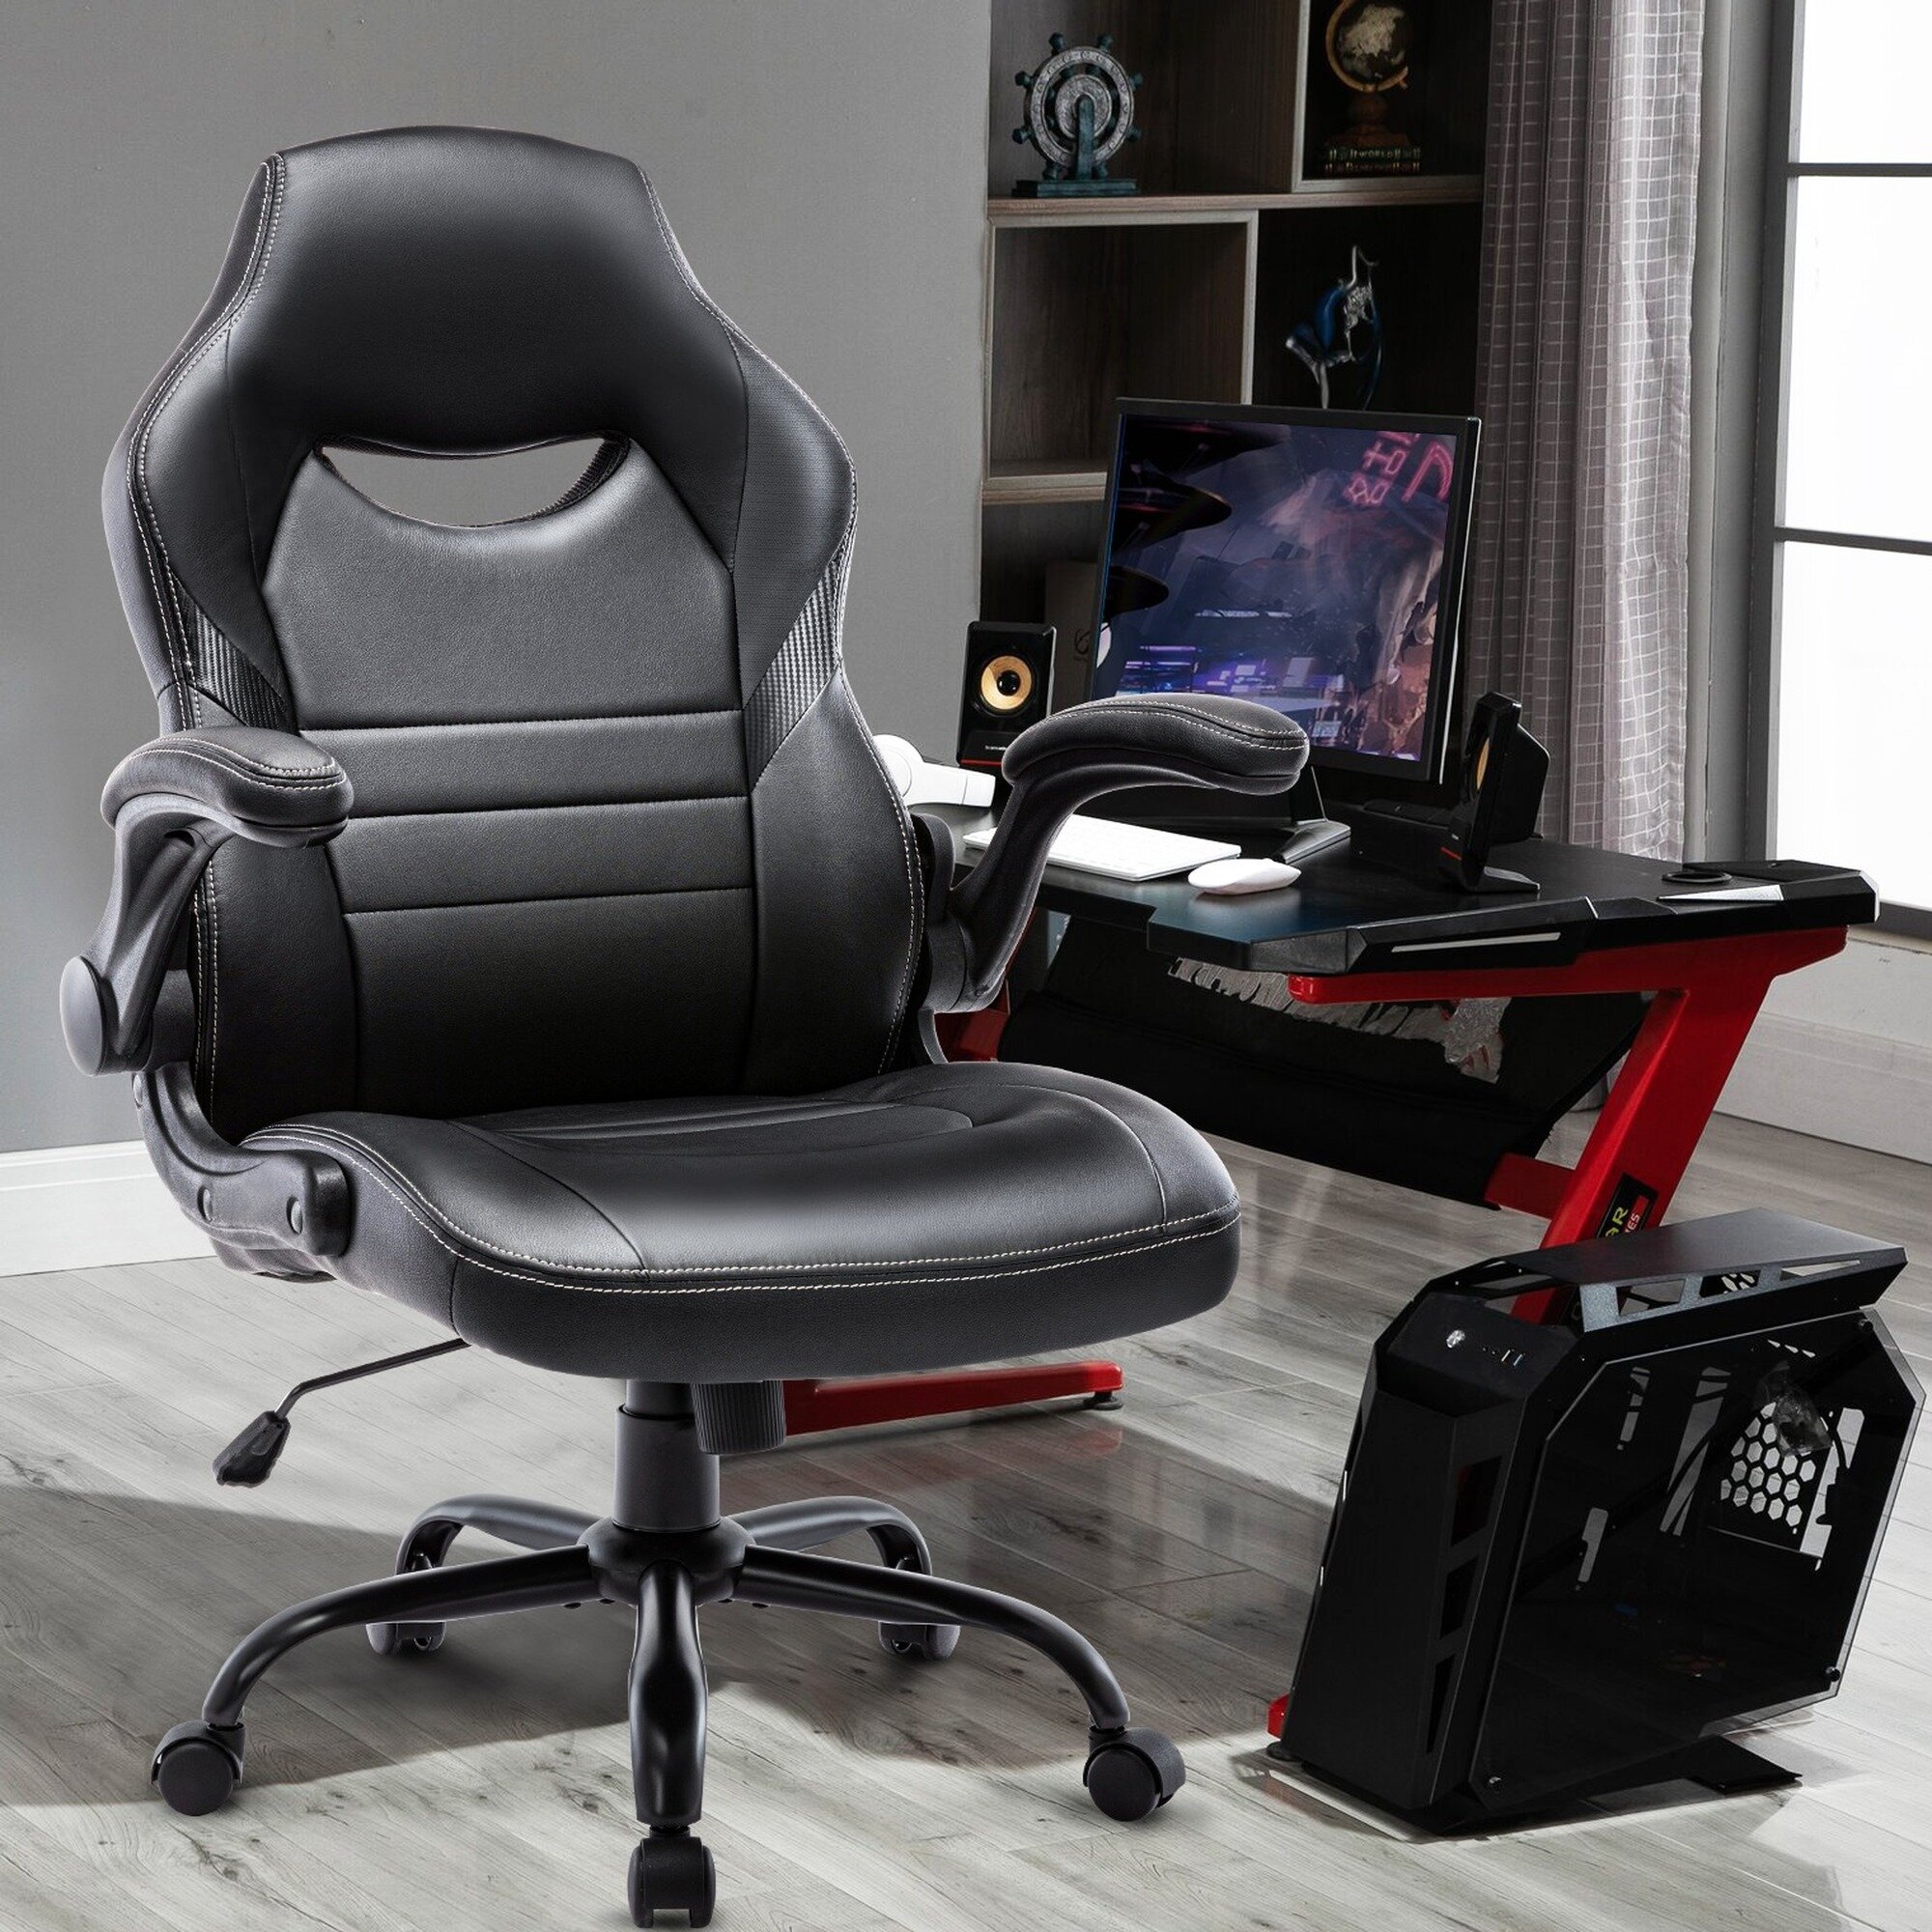 Details about   Executive Gaming Chair High-back Swivel Office Recliner Computer Desk Footrest 